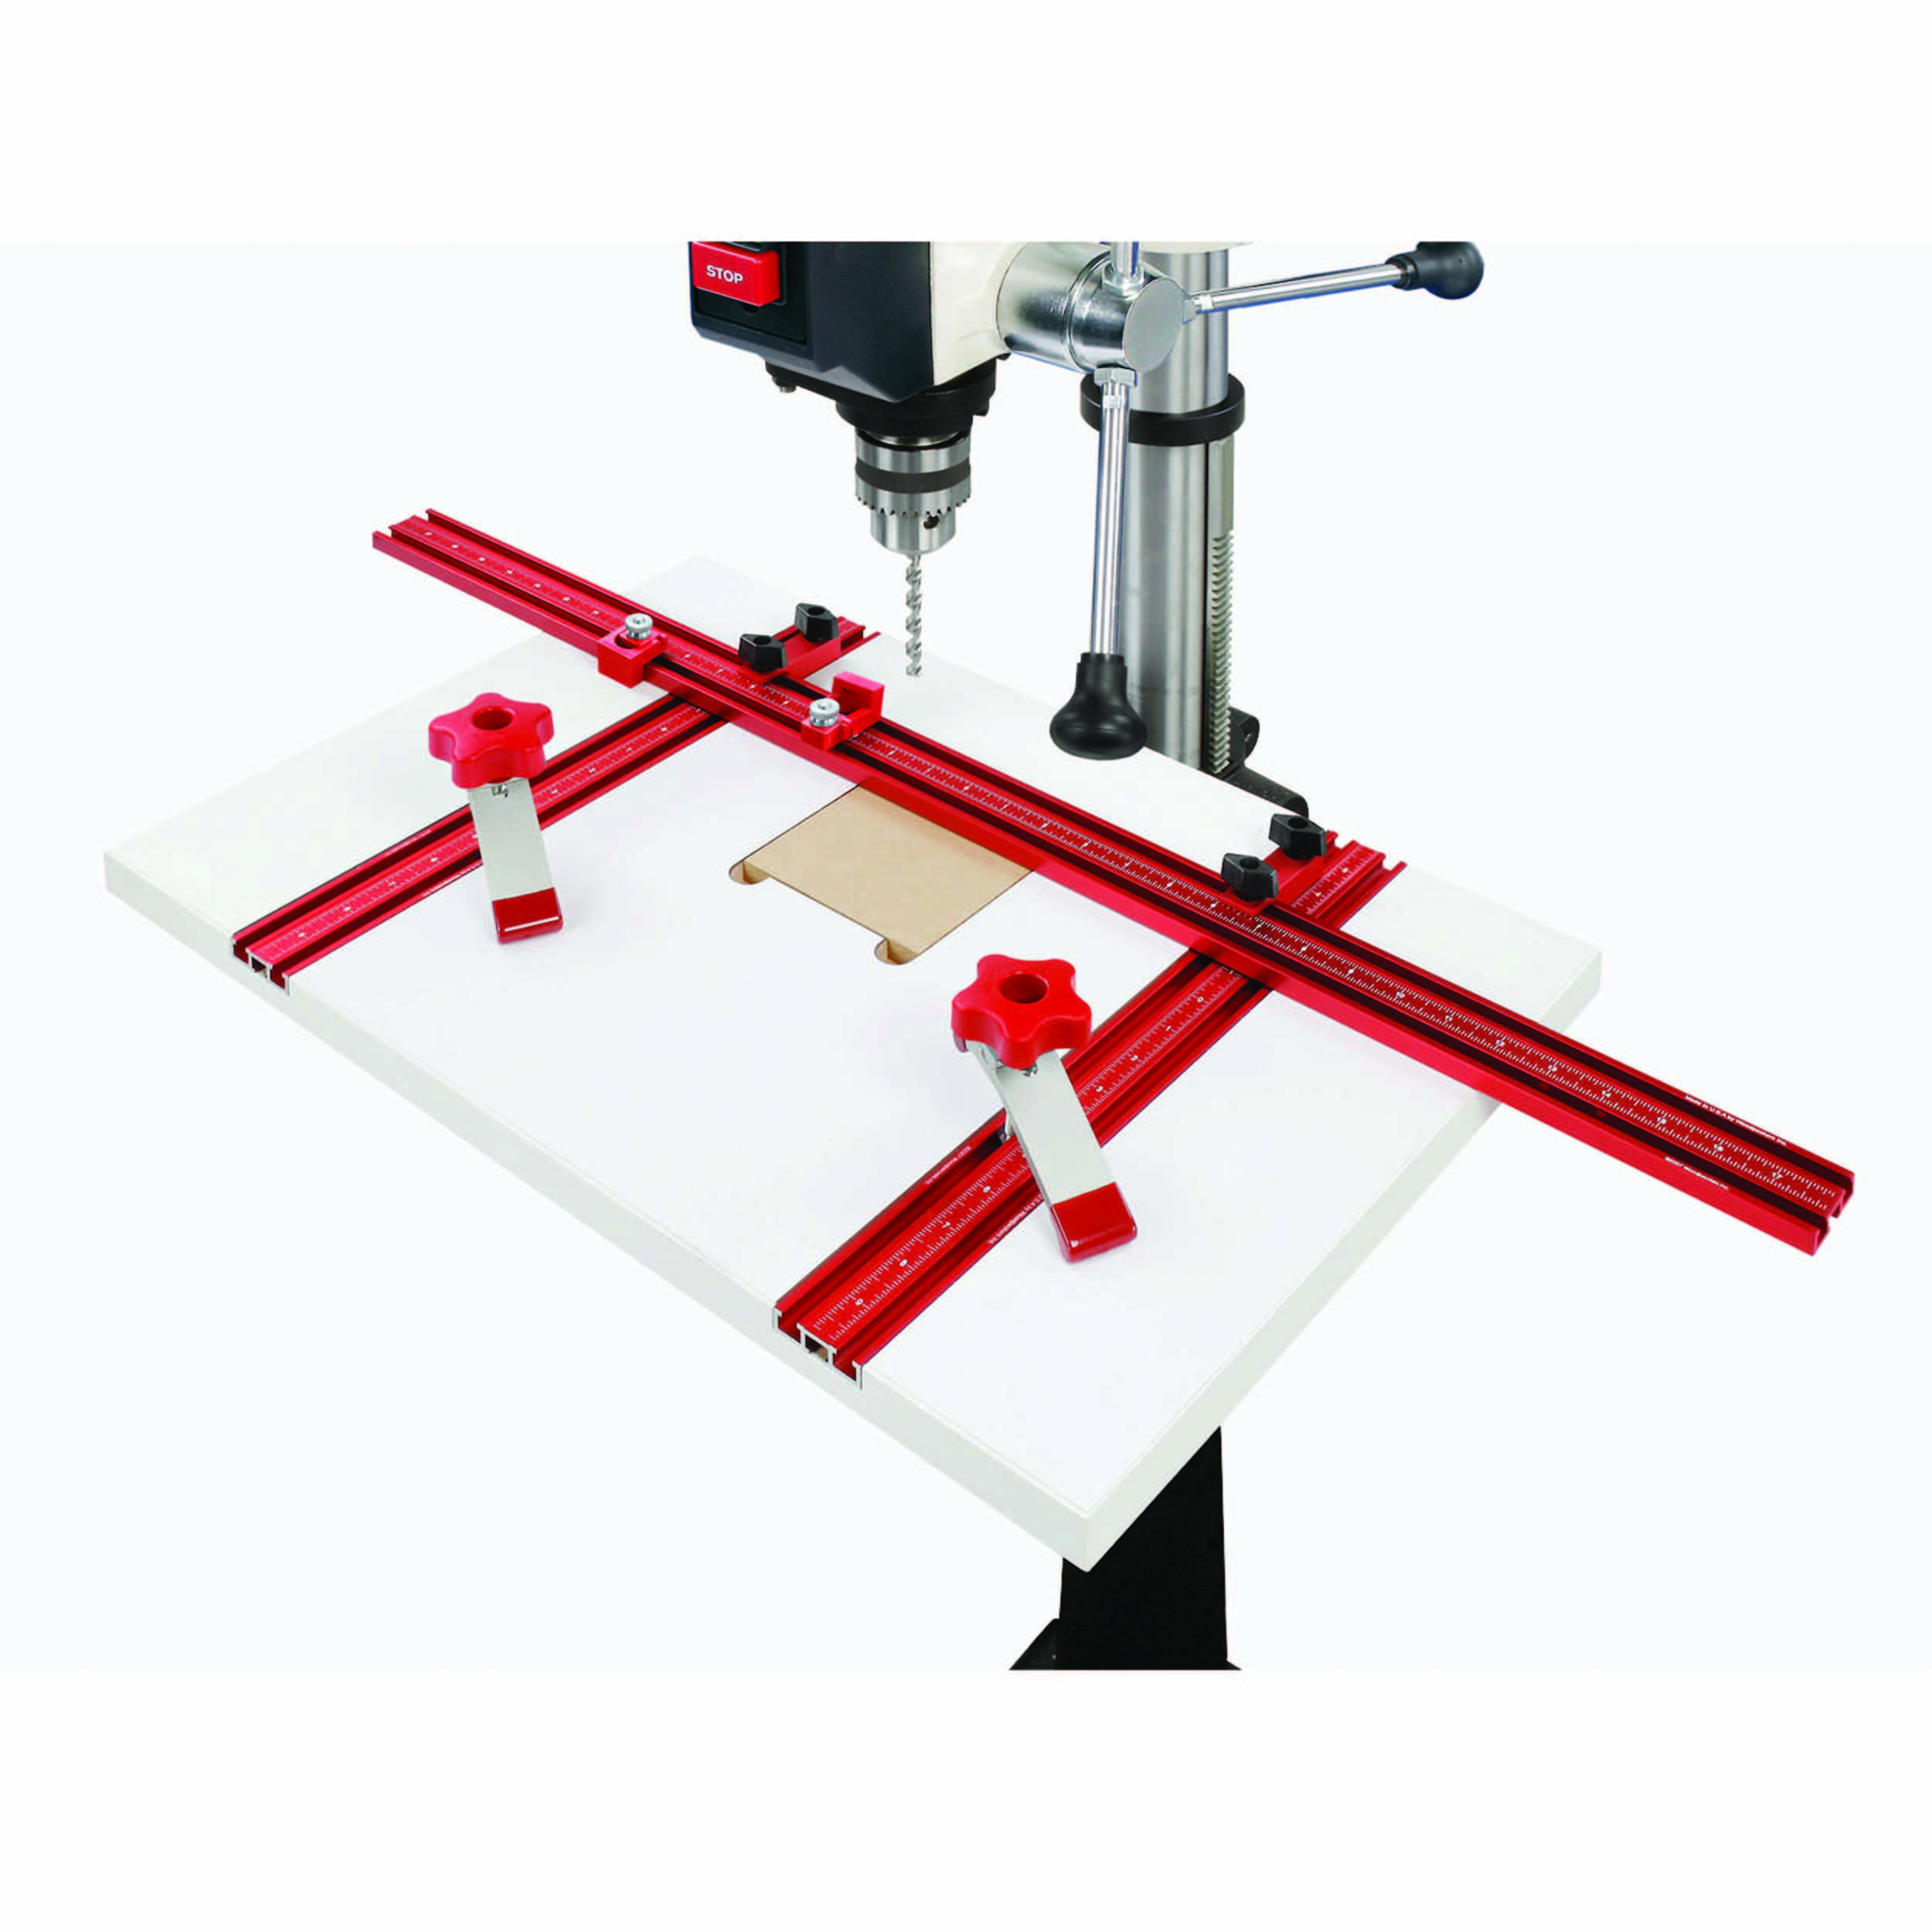 WOODPECKERS Complete Drill Press Table